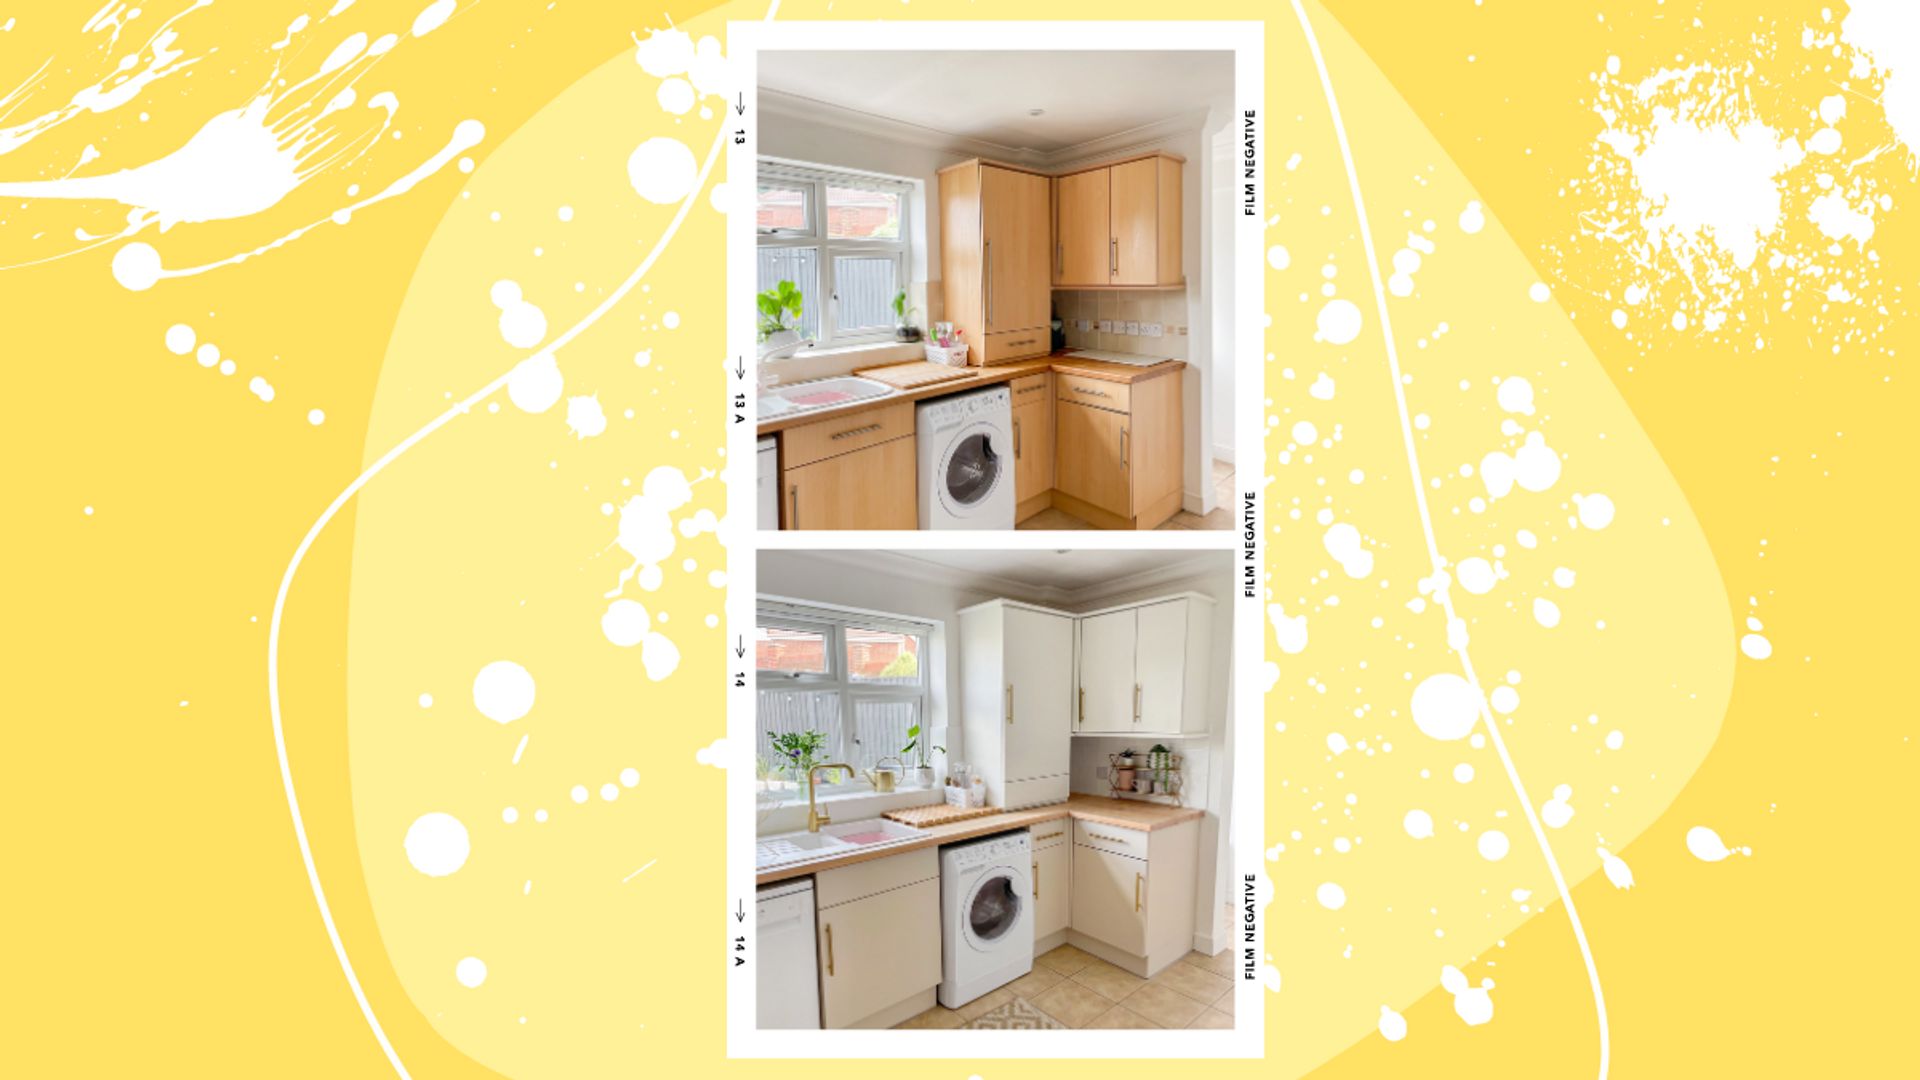 This £400 rental kitchen makeover will leave you astounded